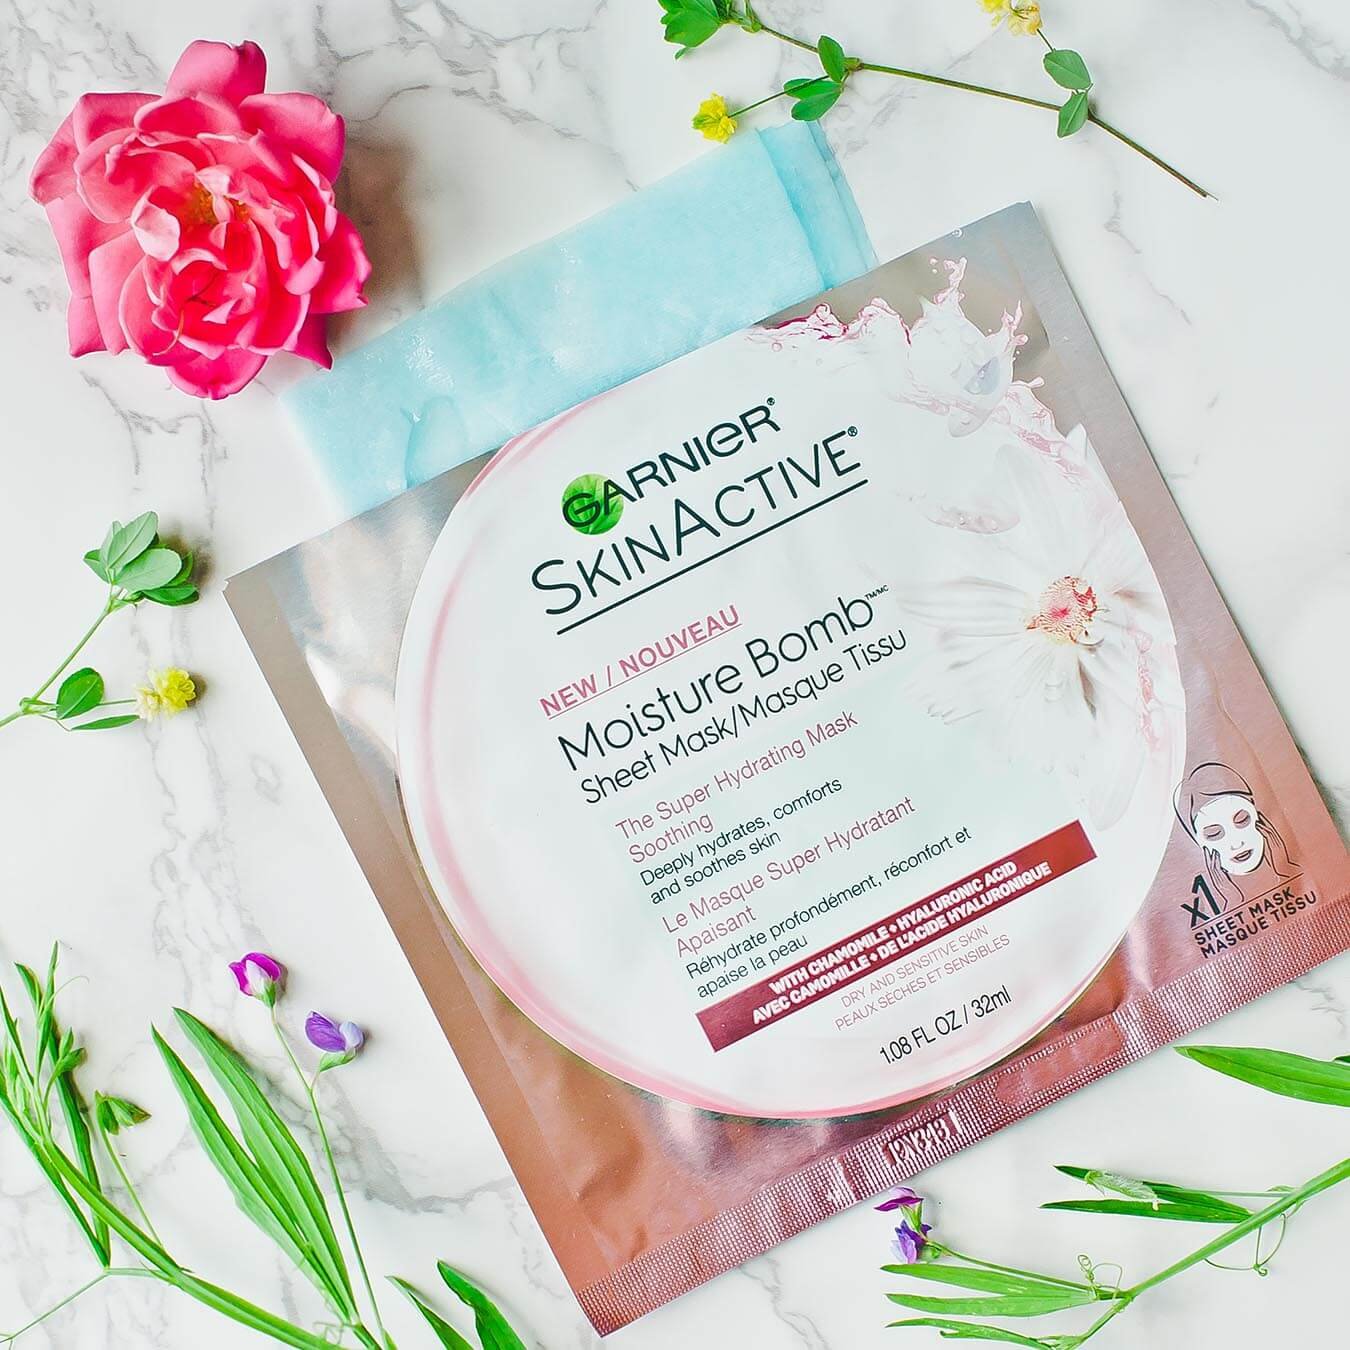 Garnier SkinActive Moisture Bomb Sheet Mask with Chamomile with the blue masks peeking out on white marble next to a pink rose bloom and several wild flowers.